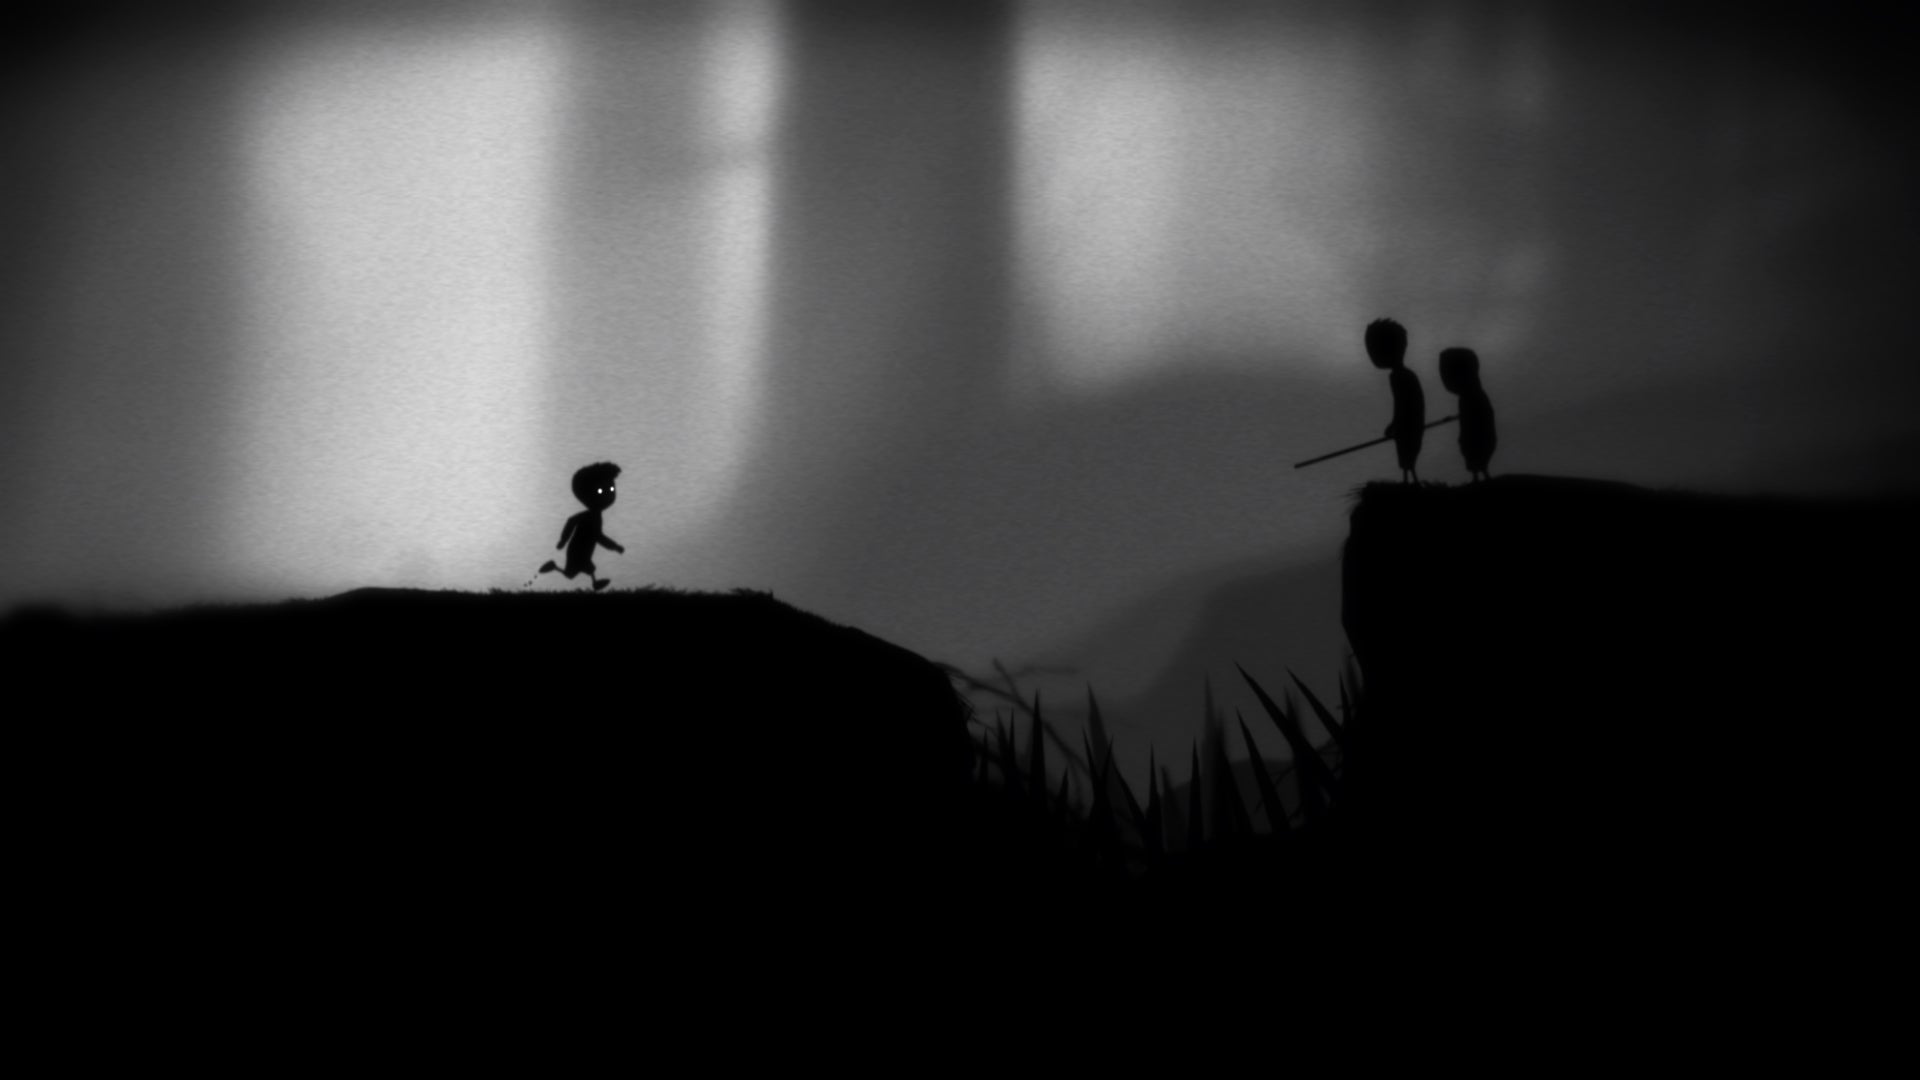 A boy looks on at two shadowy figures on the other side of a spiky chasm in Limbo